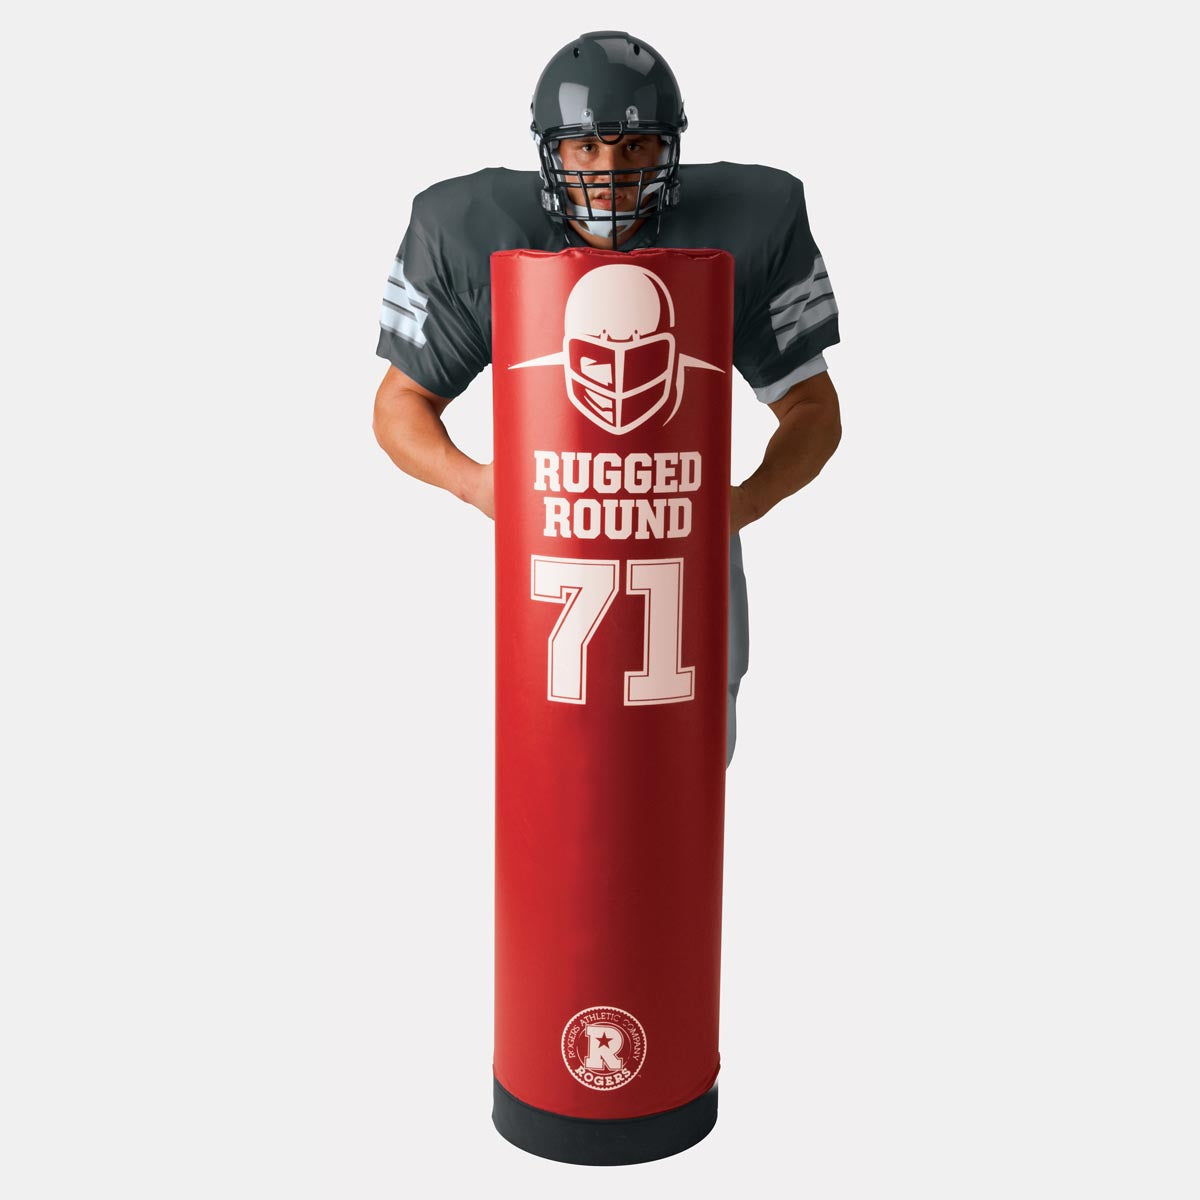 Rogers Athletic Rugged Round Stand Up Football Dummy